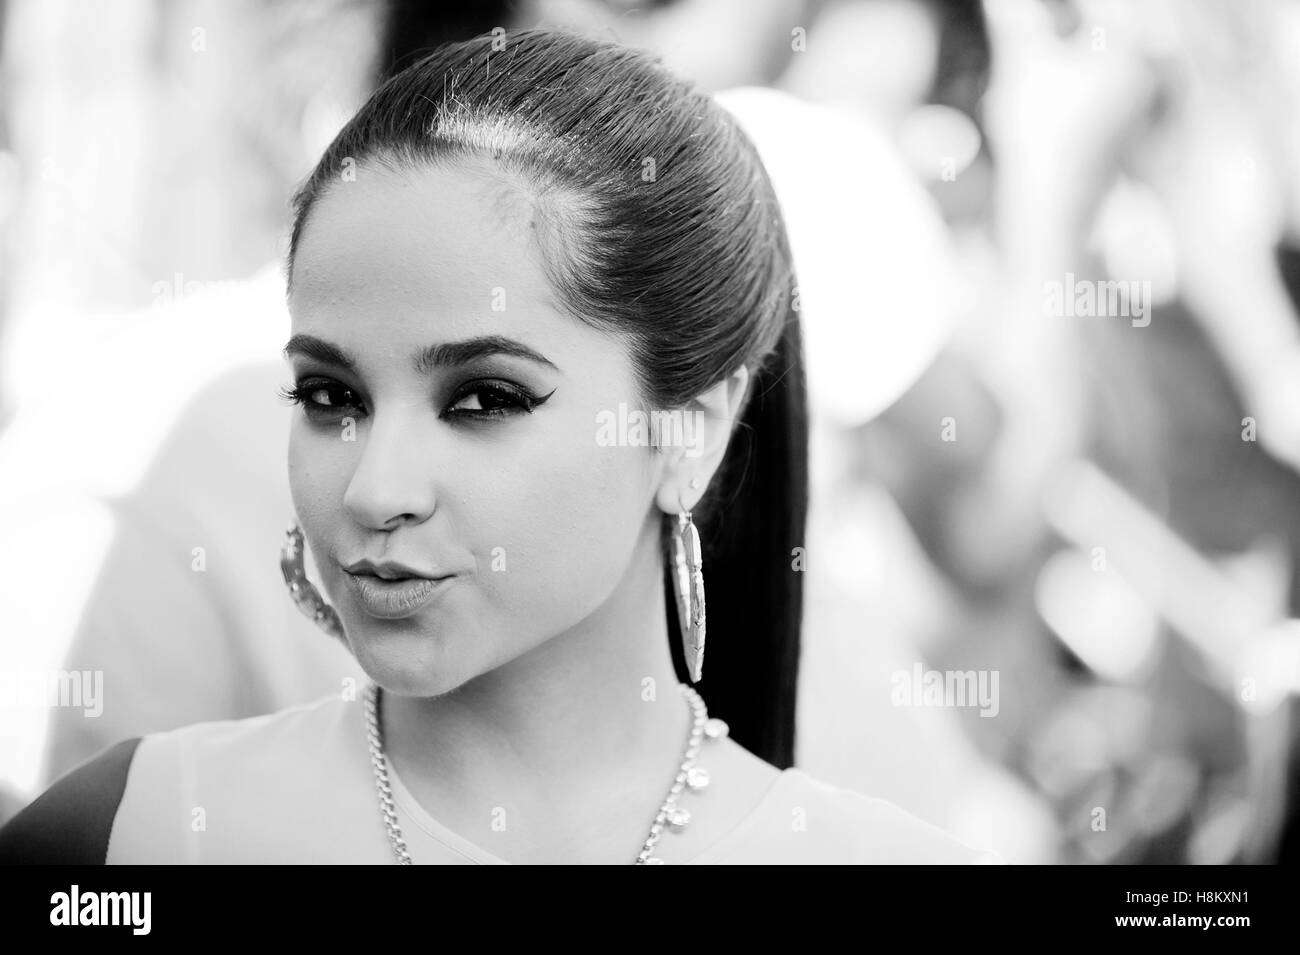 Becky G backstage portrait at the 2013 Power 106 Powerhouse concert at the Honda Center in Anaheim, California. (Digitally altered black and white) Stock Photo